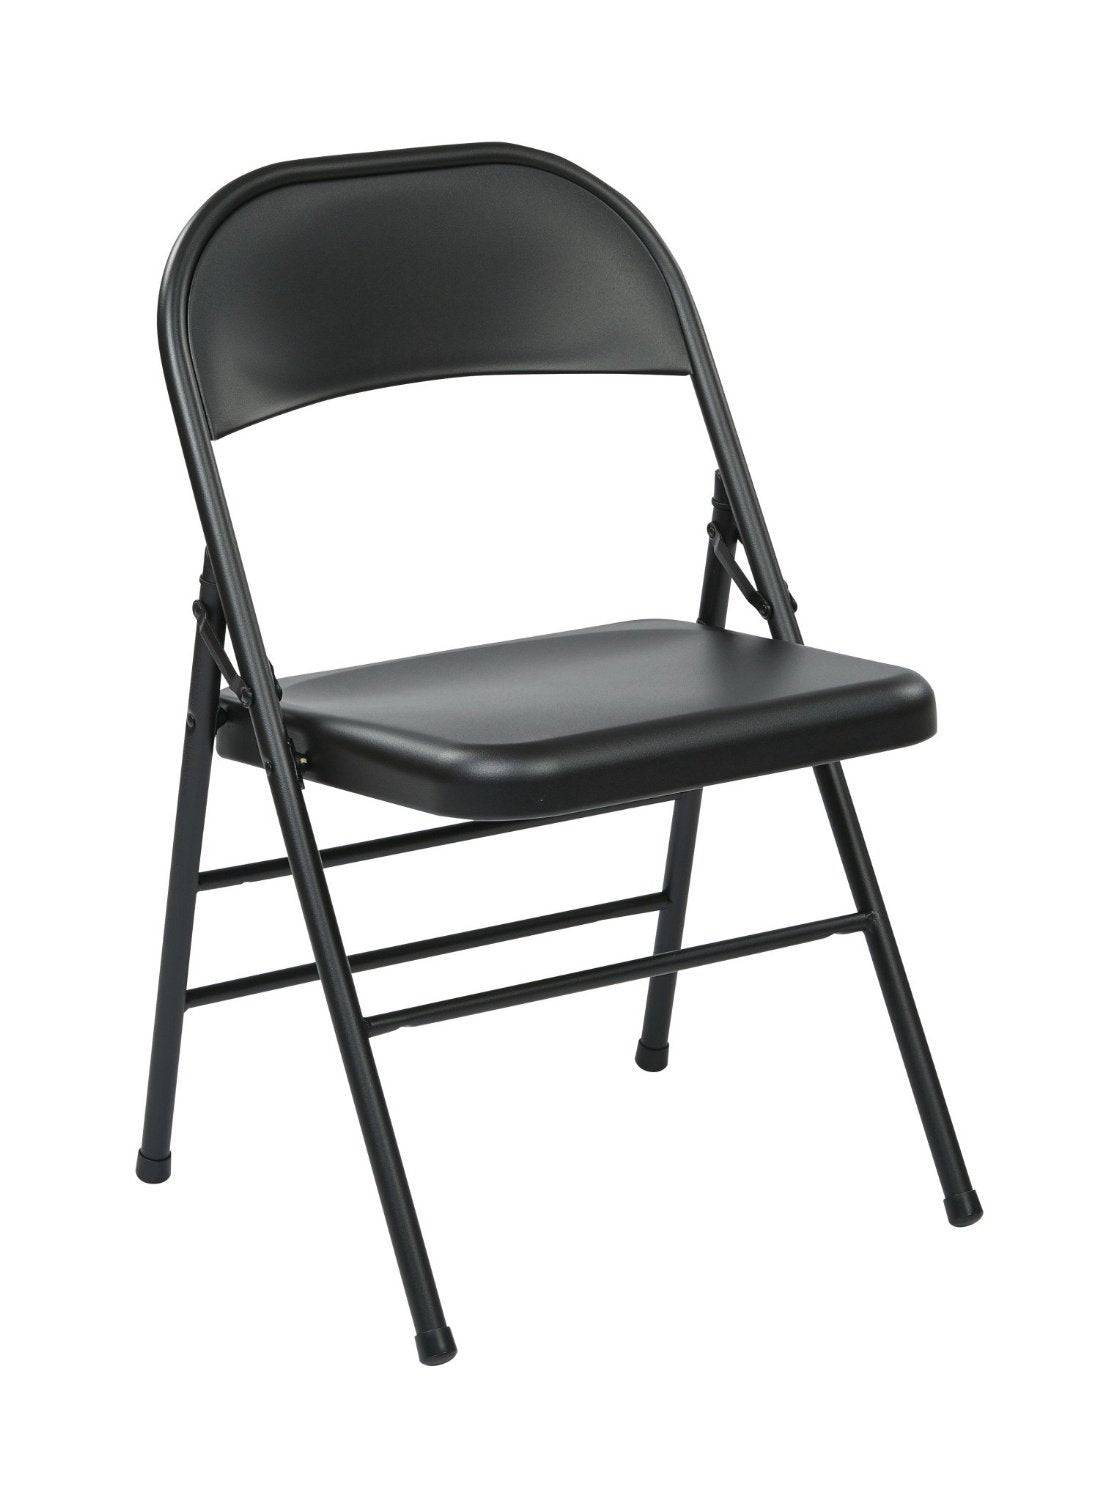 Work Smart Ff-22324m Folding Chair With Metal Seat And Back